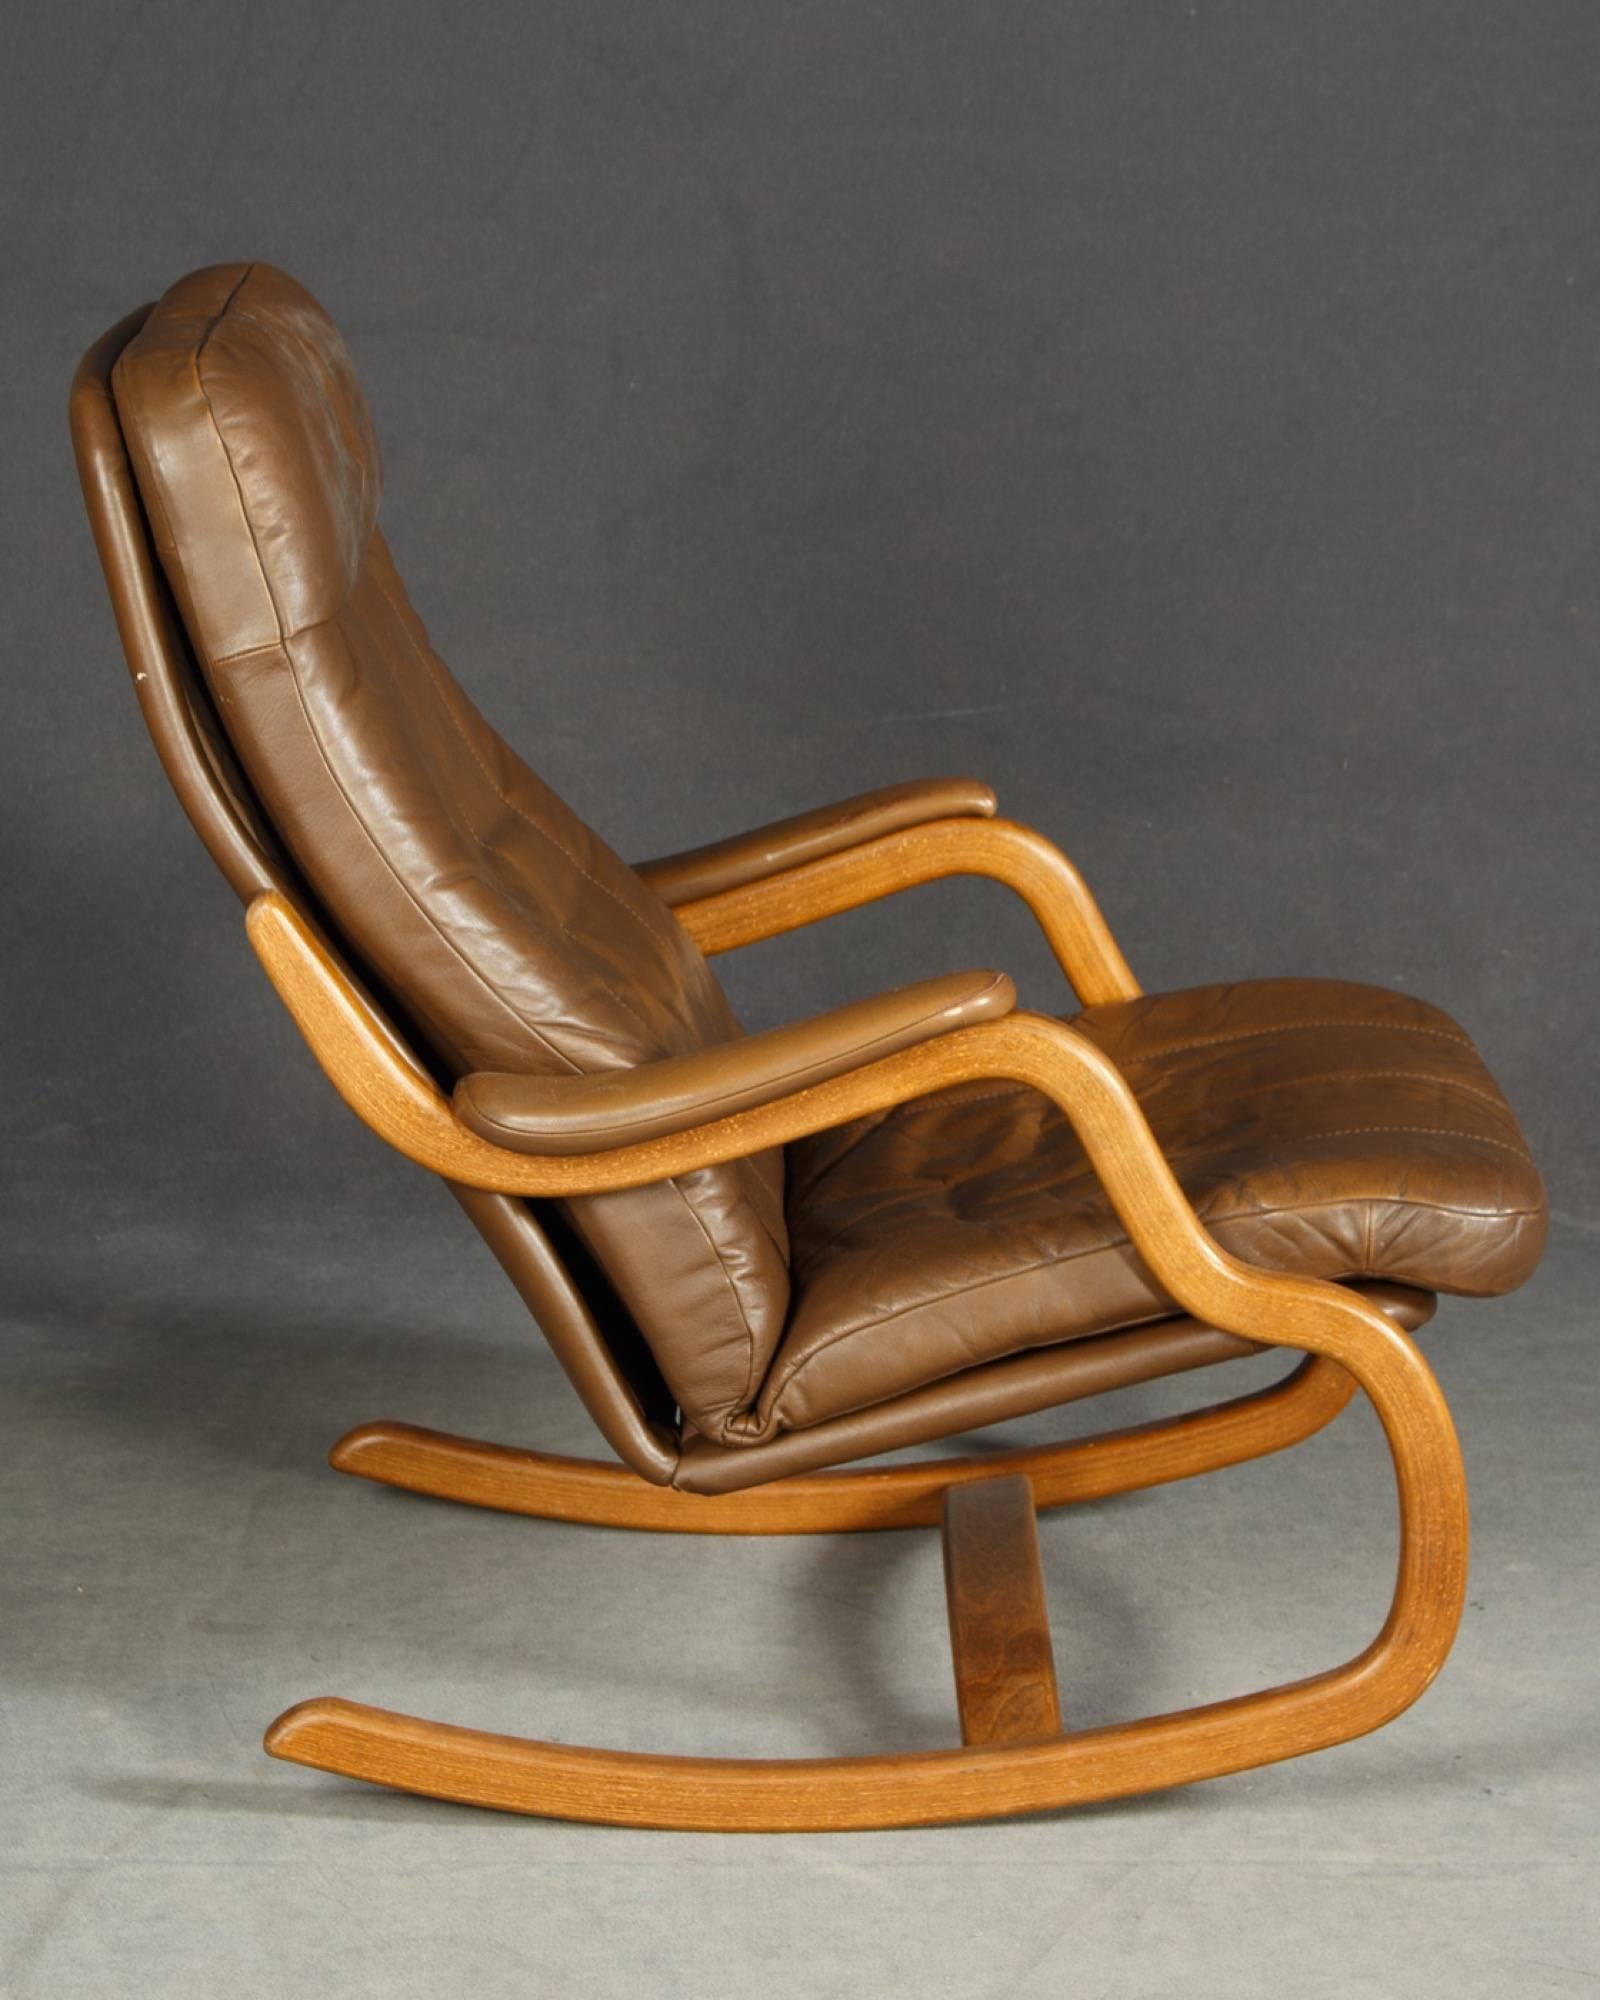 Midcentury Danish lounge chair with ottoman and leather cushions. Nicely executed design.